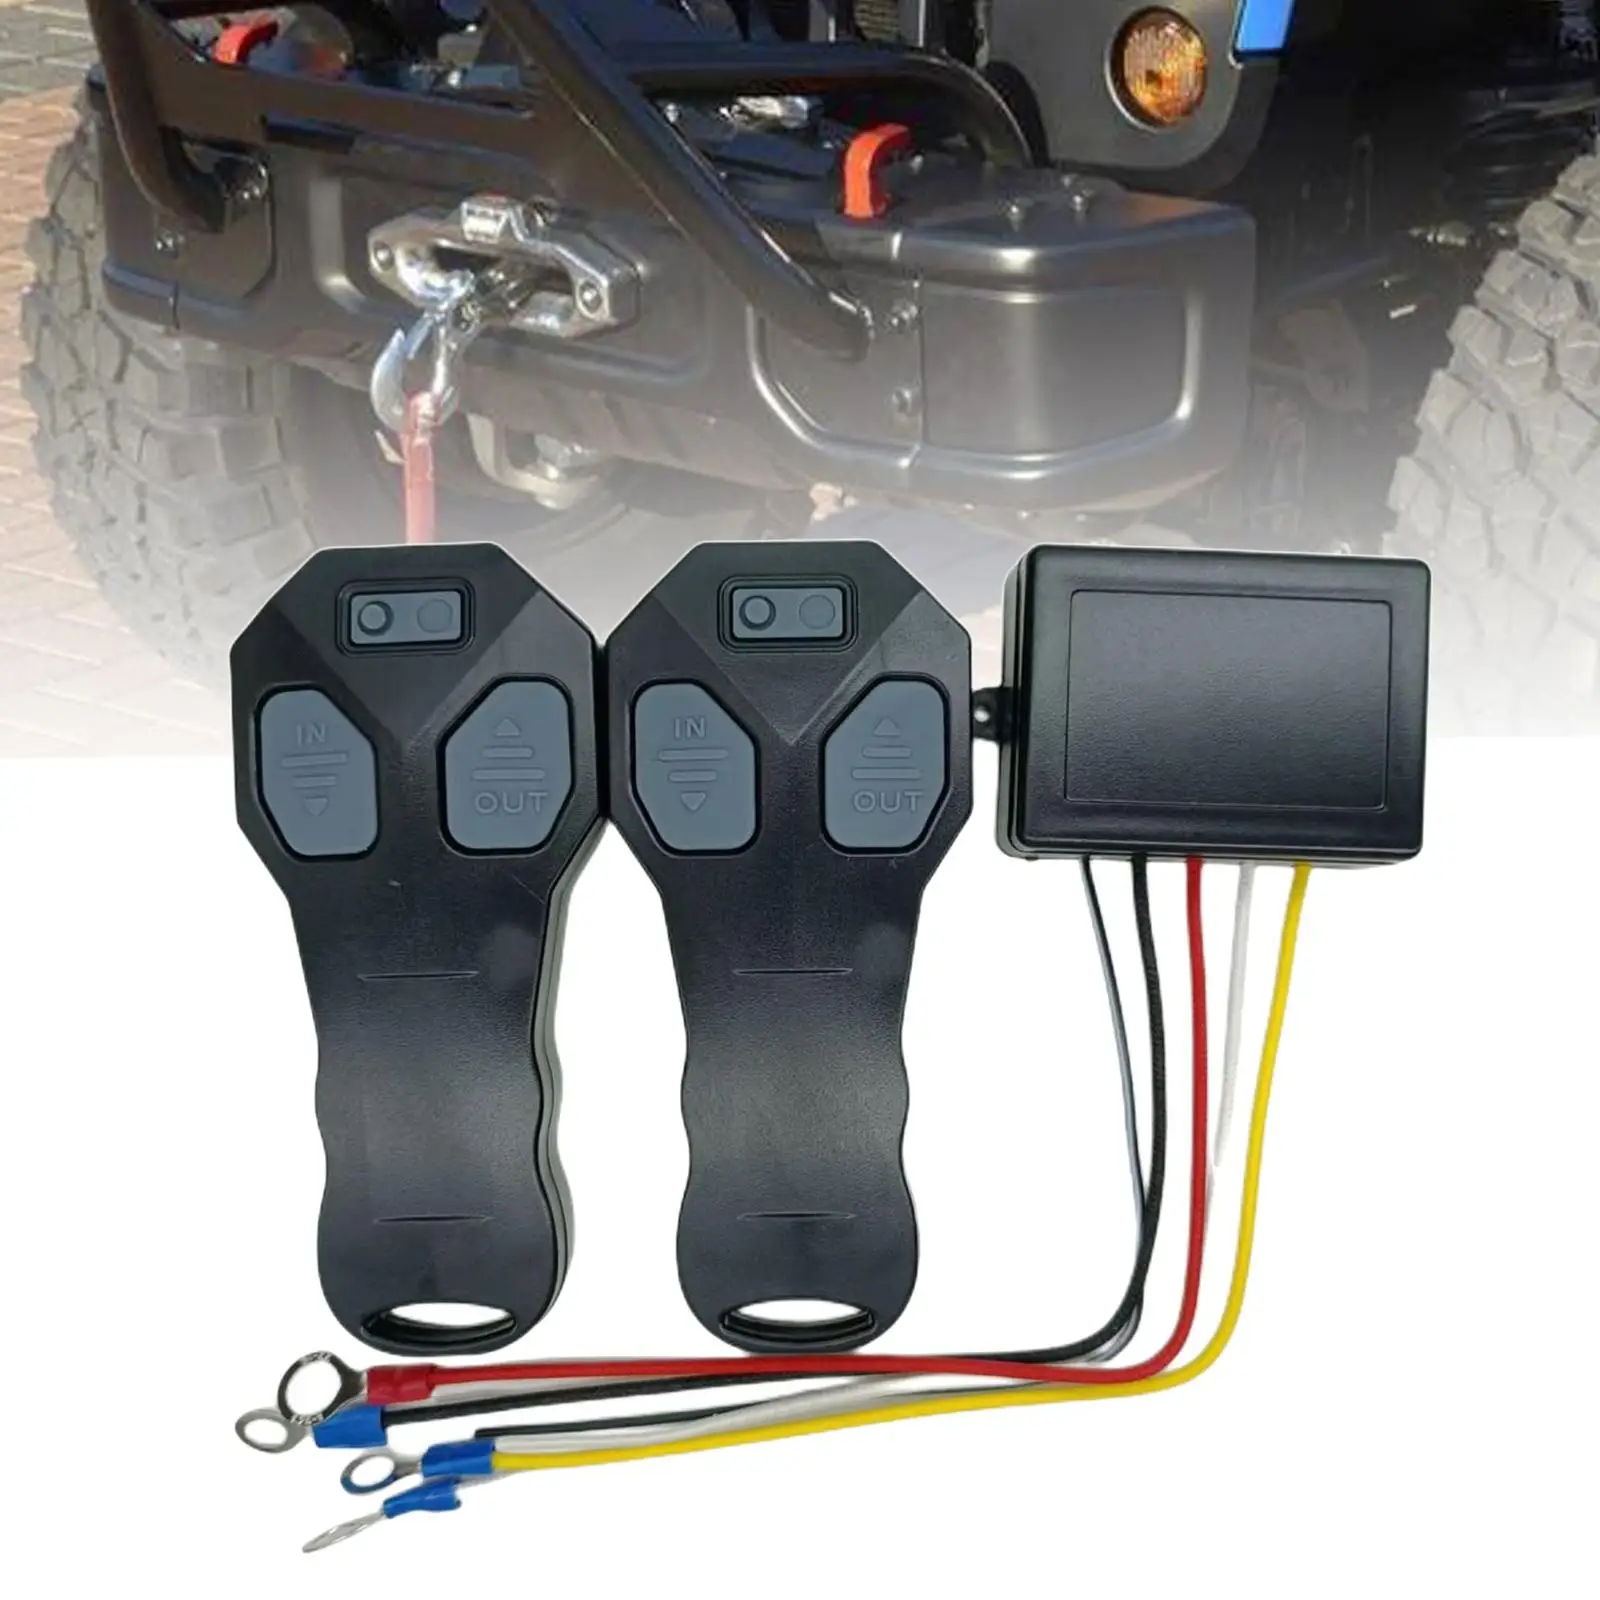 Wireless Winch Remote Control Kit Easy Installation DC12V 24V Handset Switch 2 Electric Remote Control for Truck Vehicle